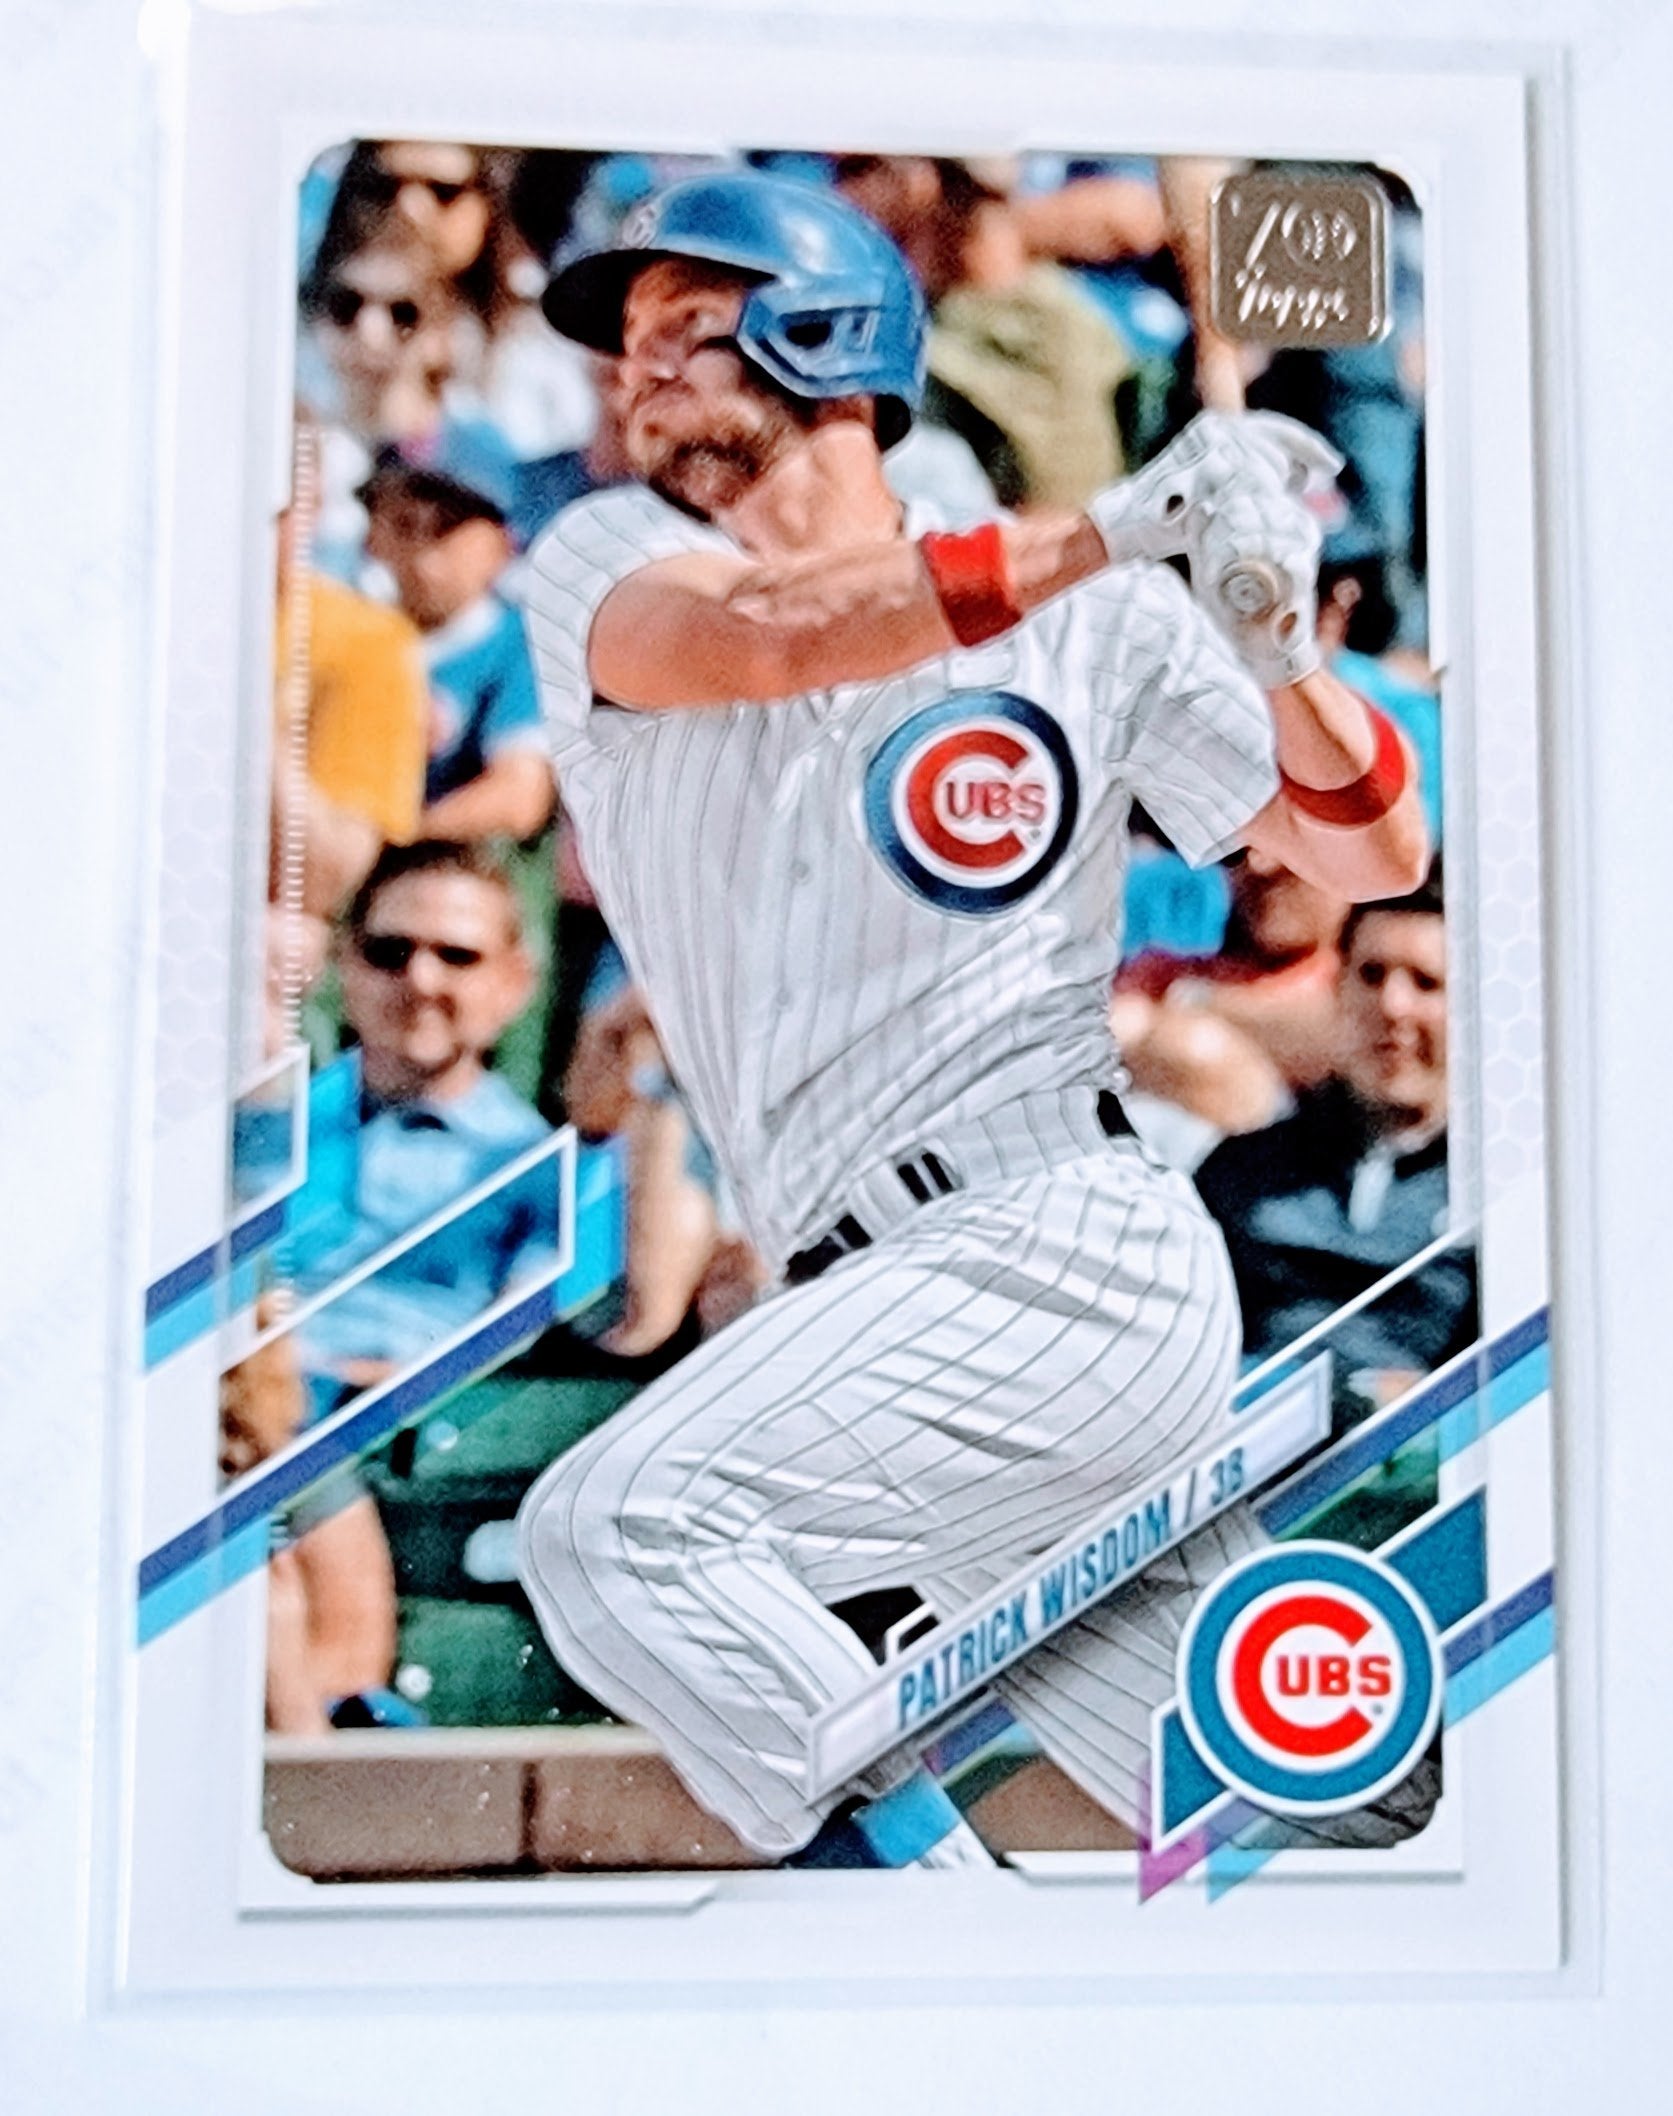 2021 Topps Update Patrick Wisdom Baseball Trading Card SMCB1 simple Xclusive Collectibles   